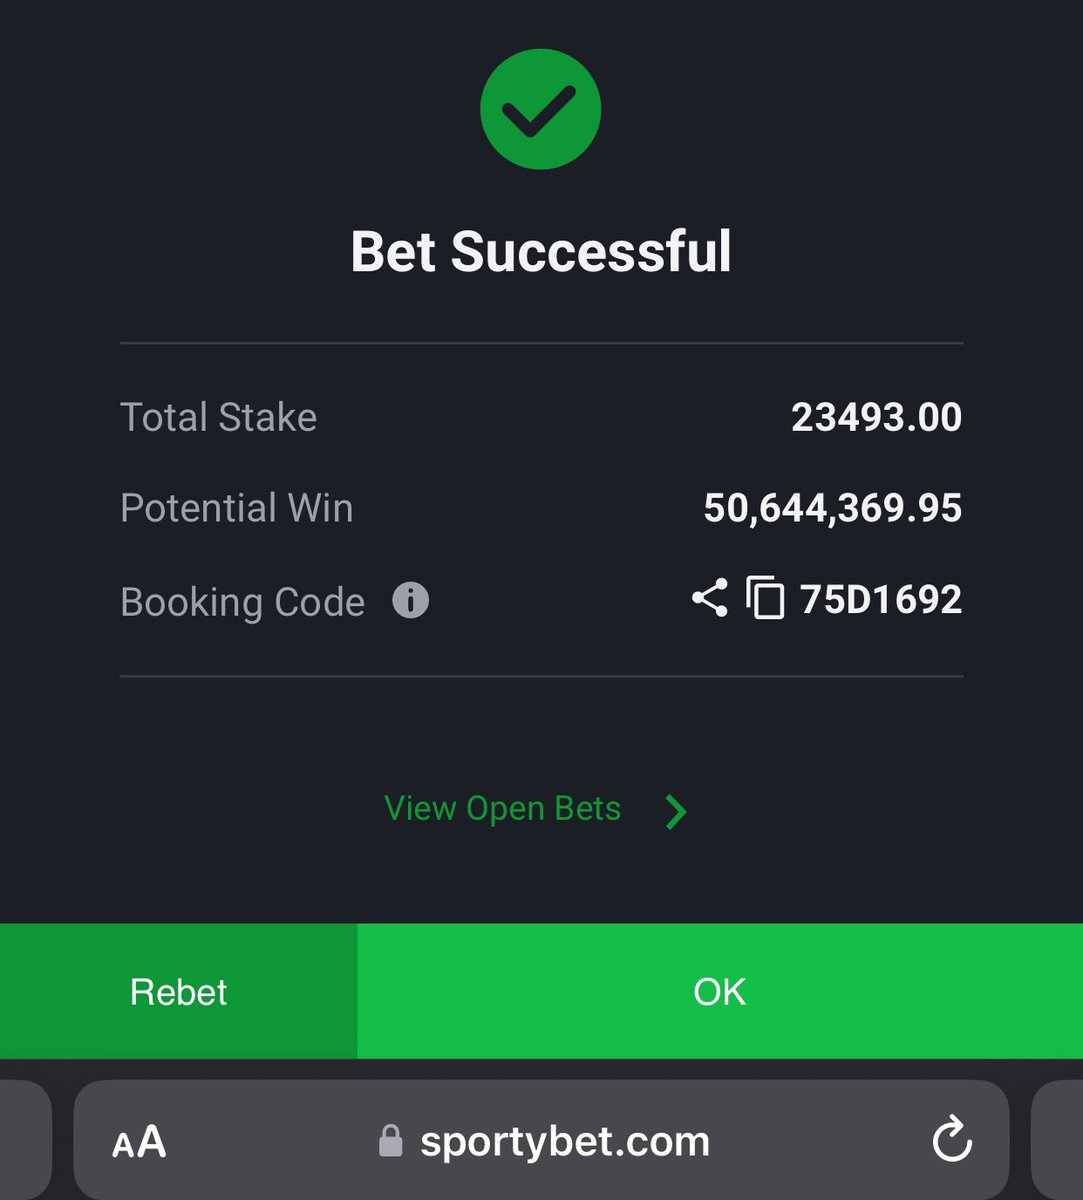 70. 4BFA30E.

800 odds. 75D1692

Betting might not be a superpower, but it feels close. Use your head.